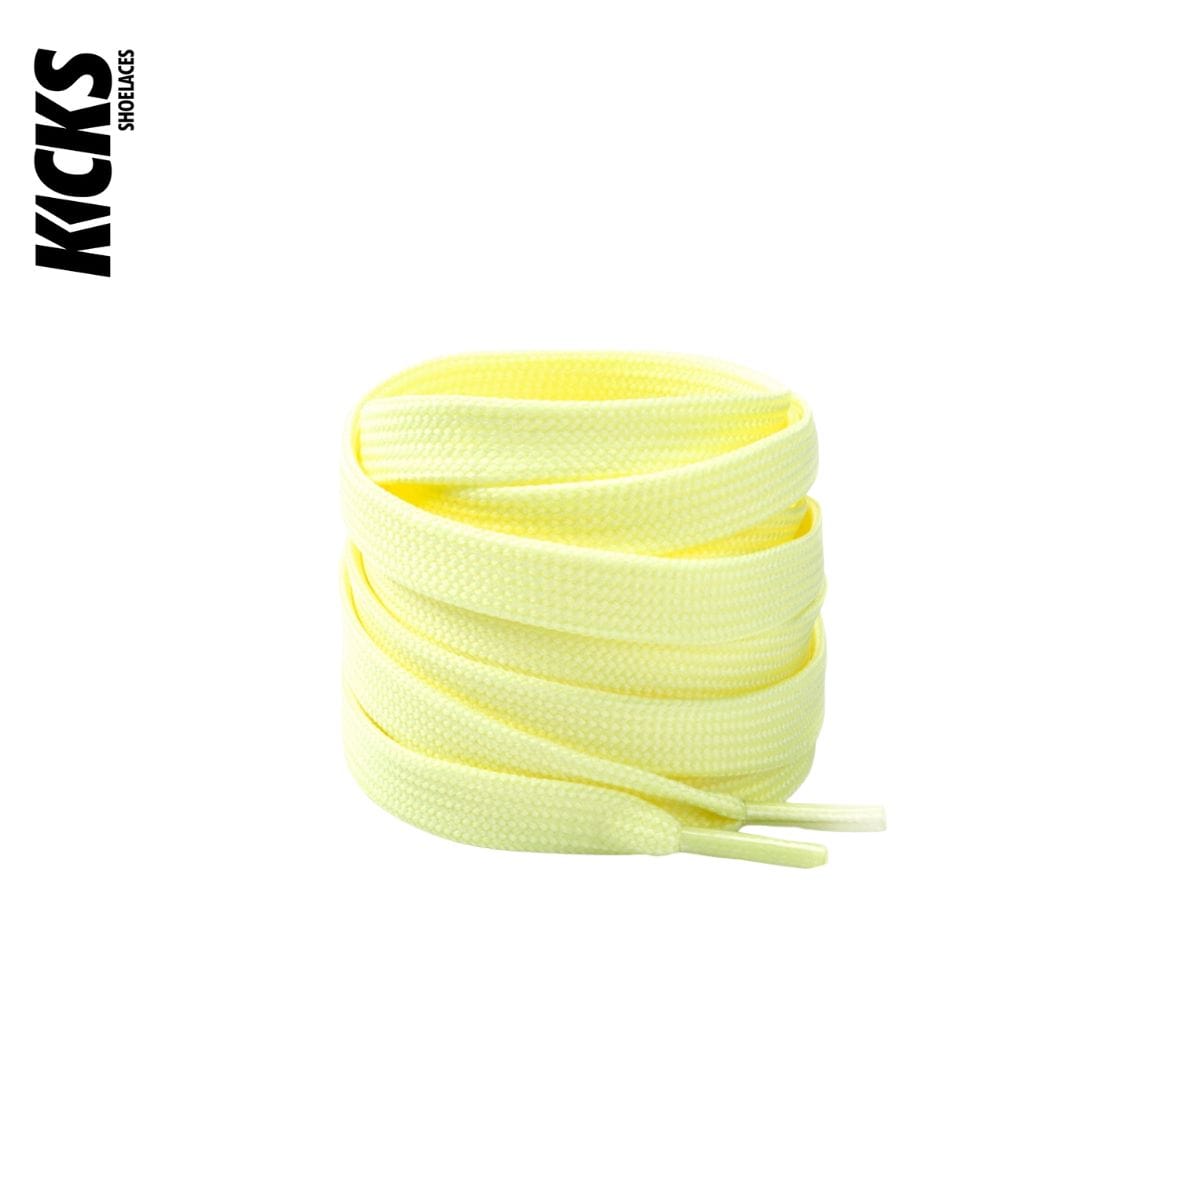 Light Yellow Replacement Laces for Adidas EQT Sneakers by Kicks Shoelaces